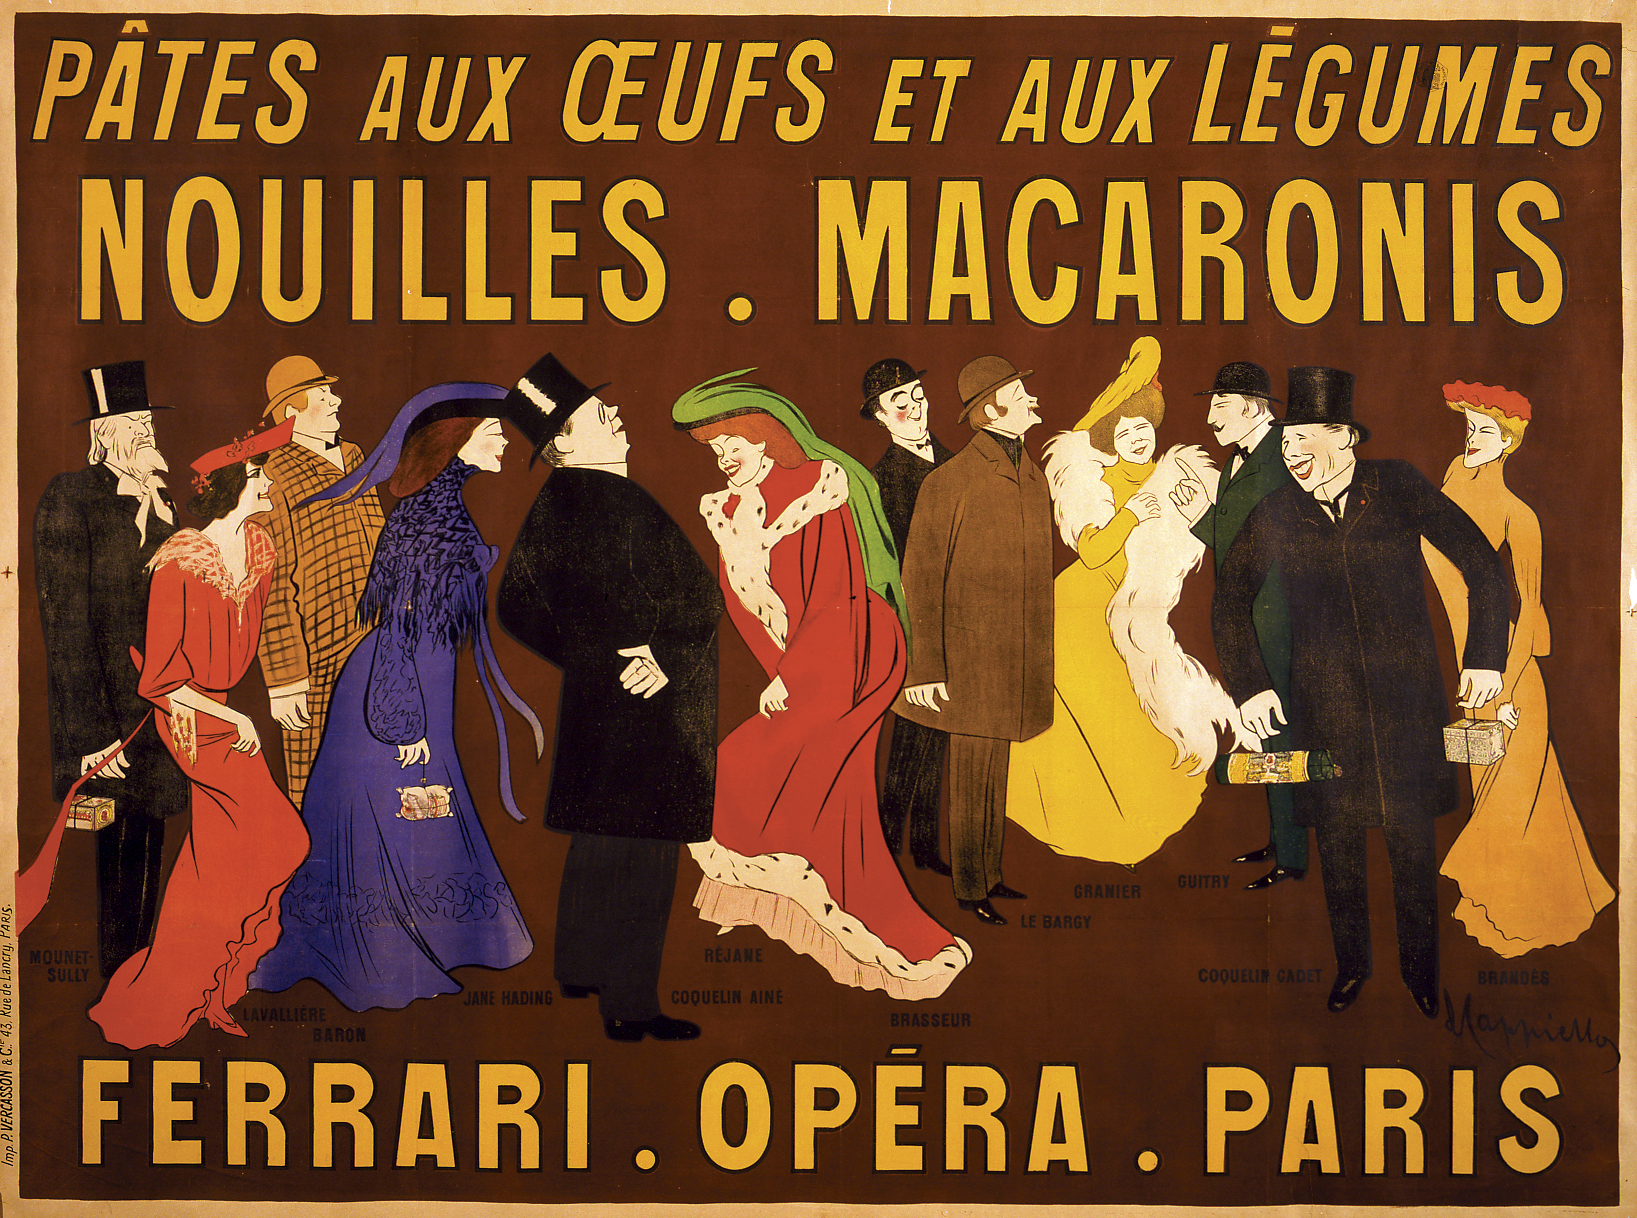 Leonetto Cappiello, the great poster artist and caricaturist of the Belle Époque, will be honoured with an exhibition!